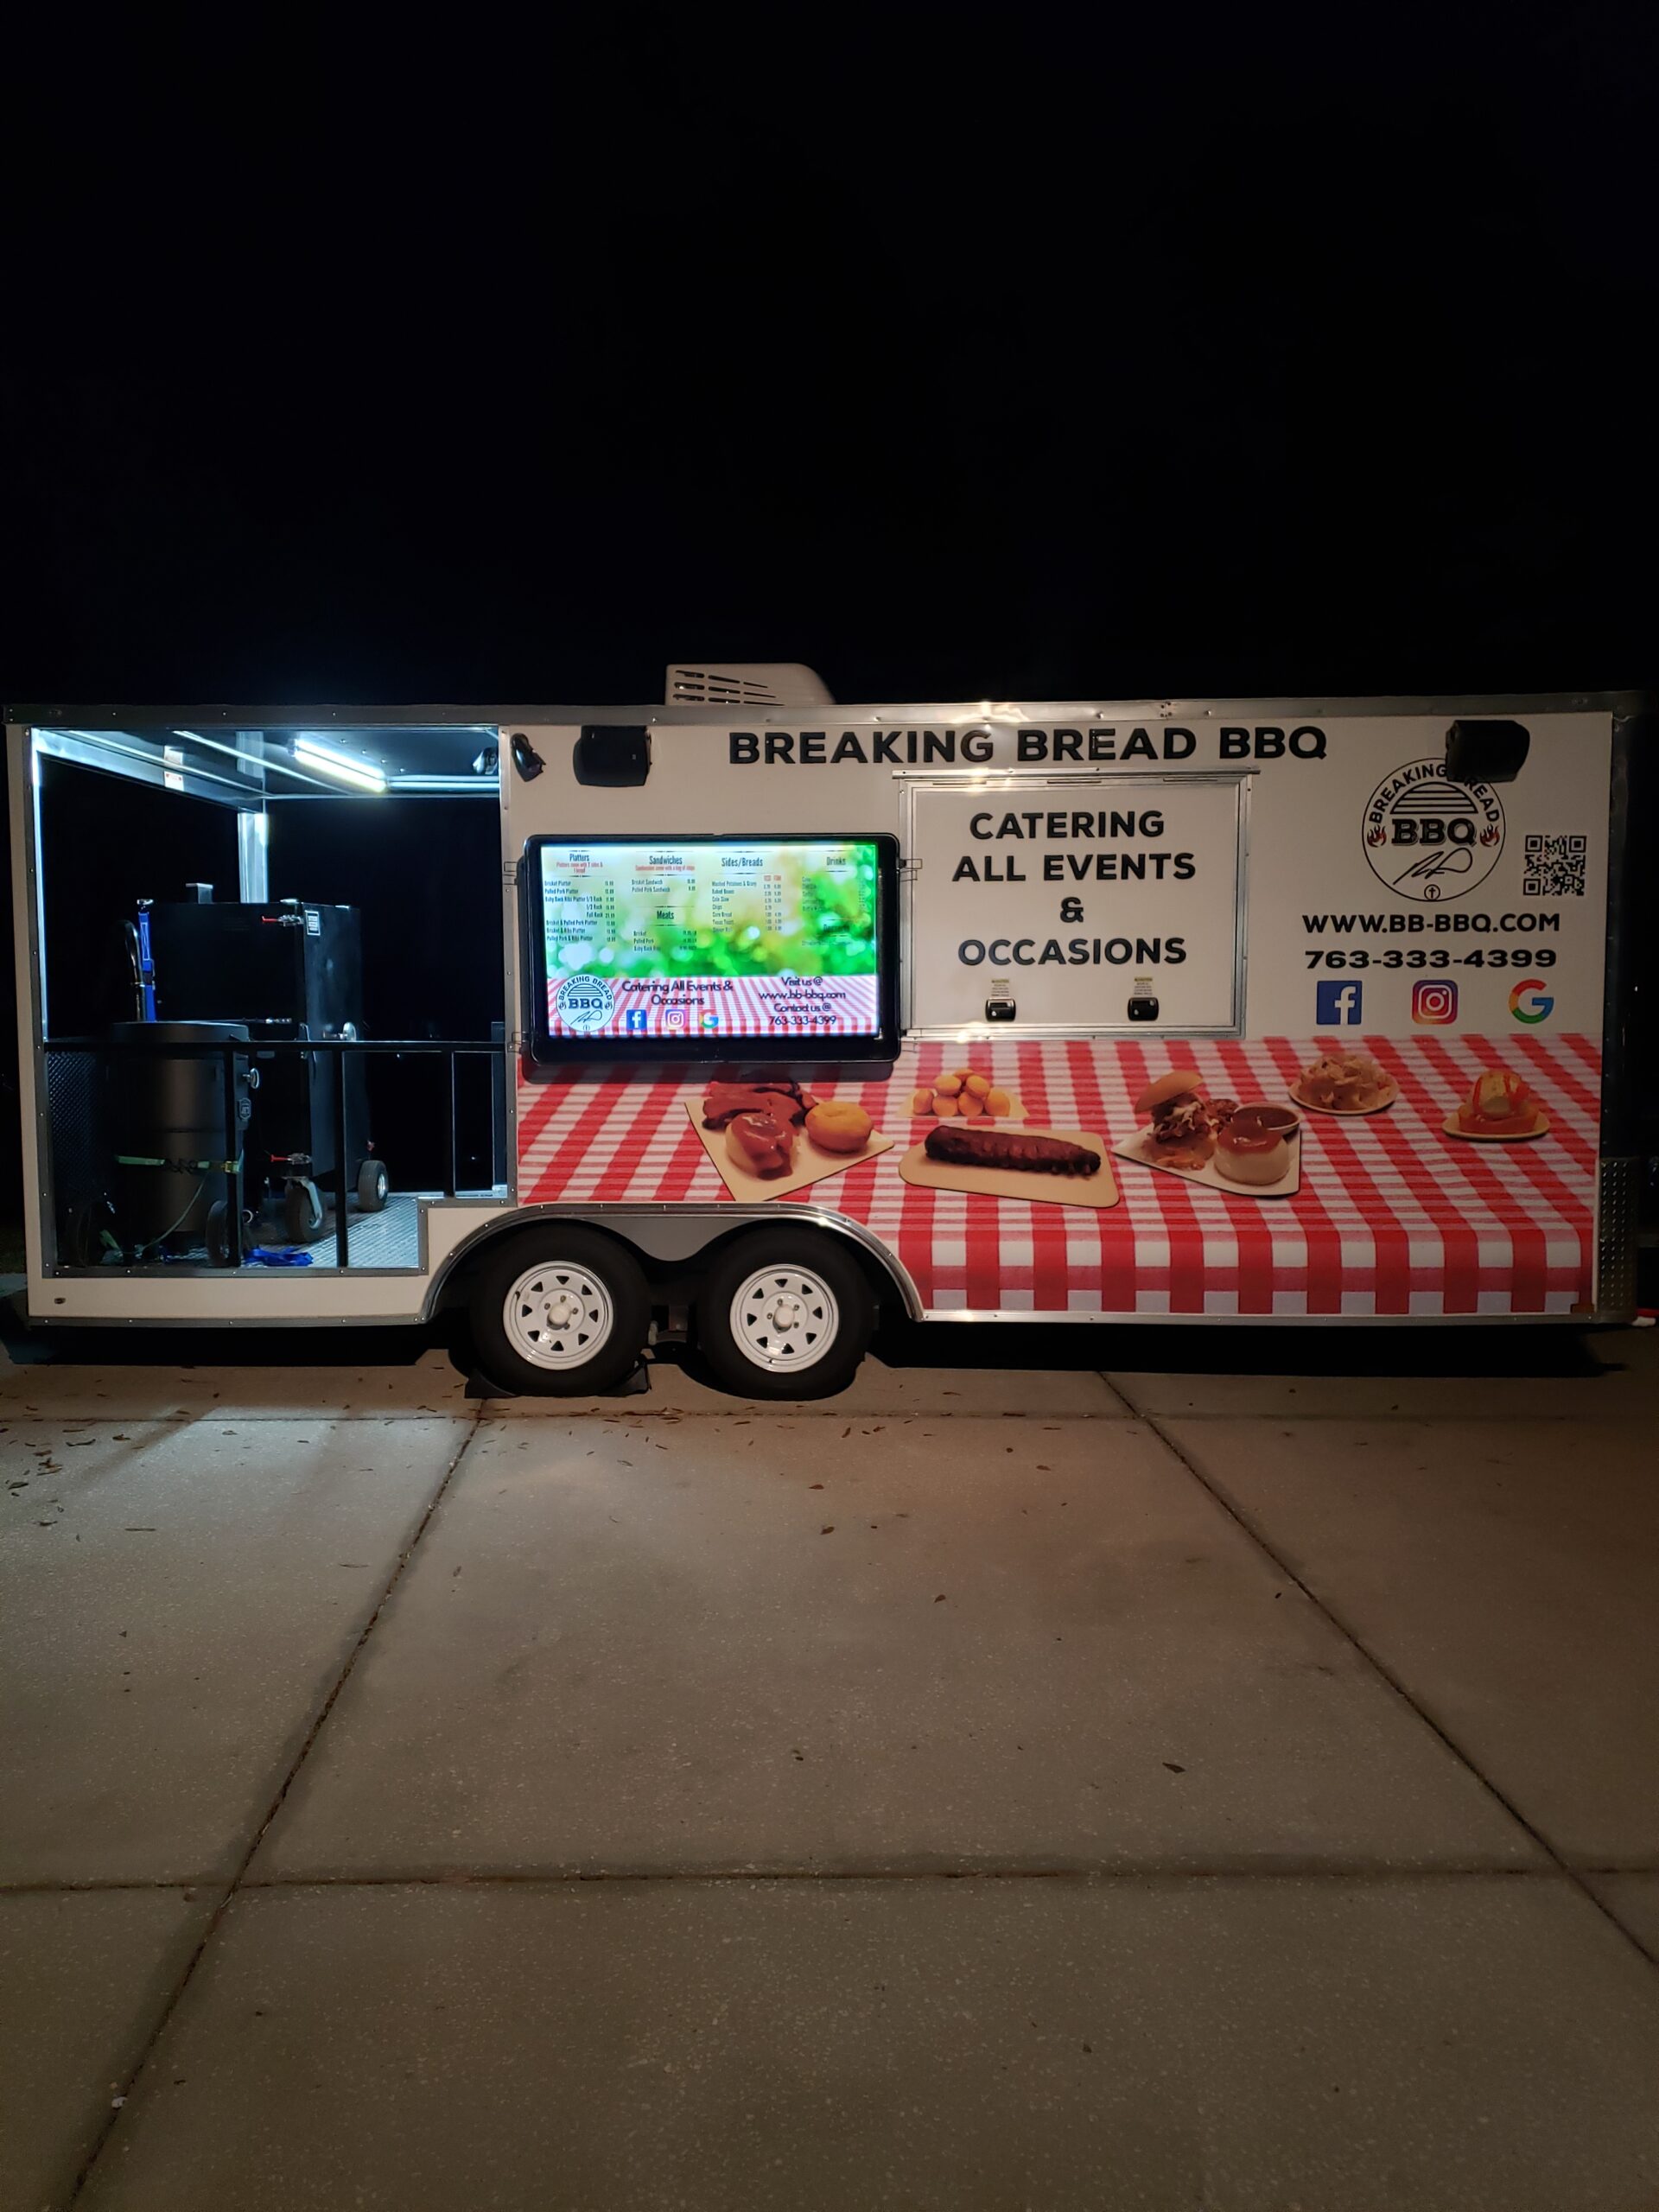 Our first food truck